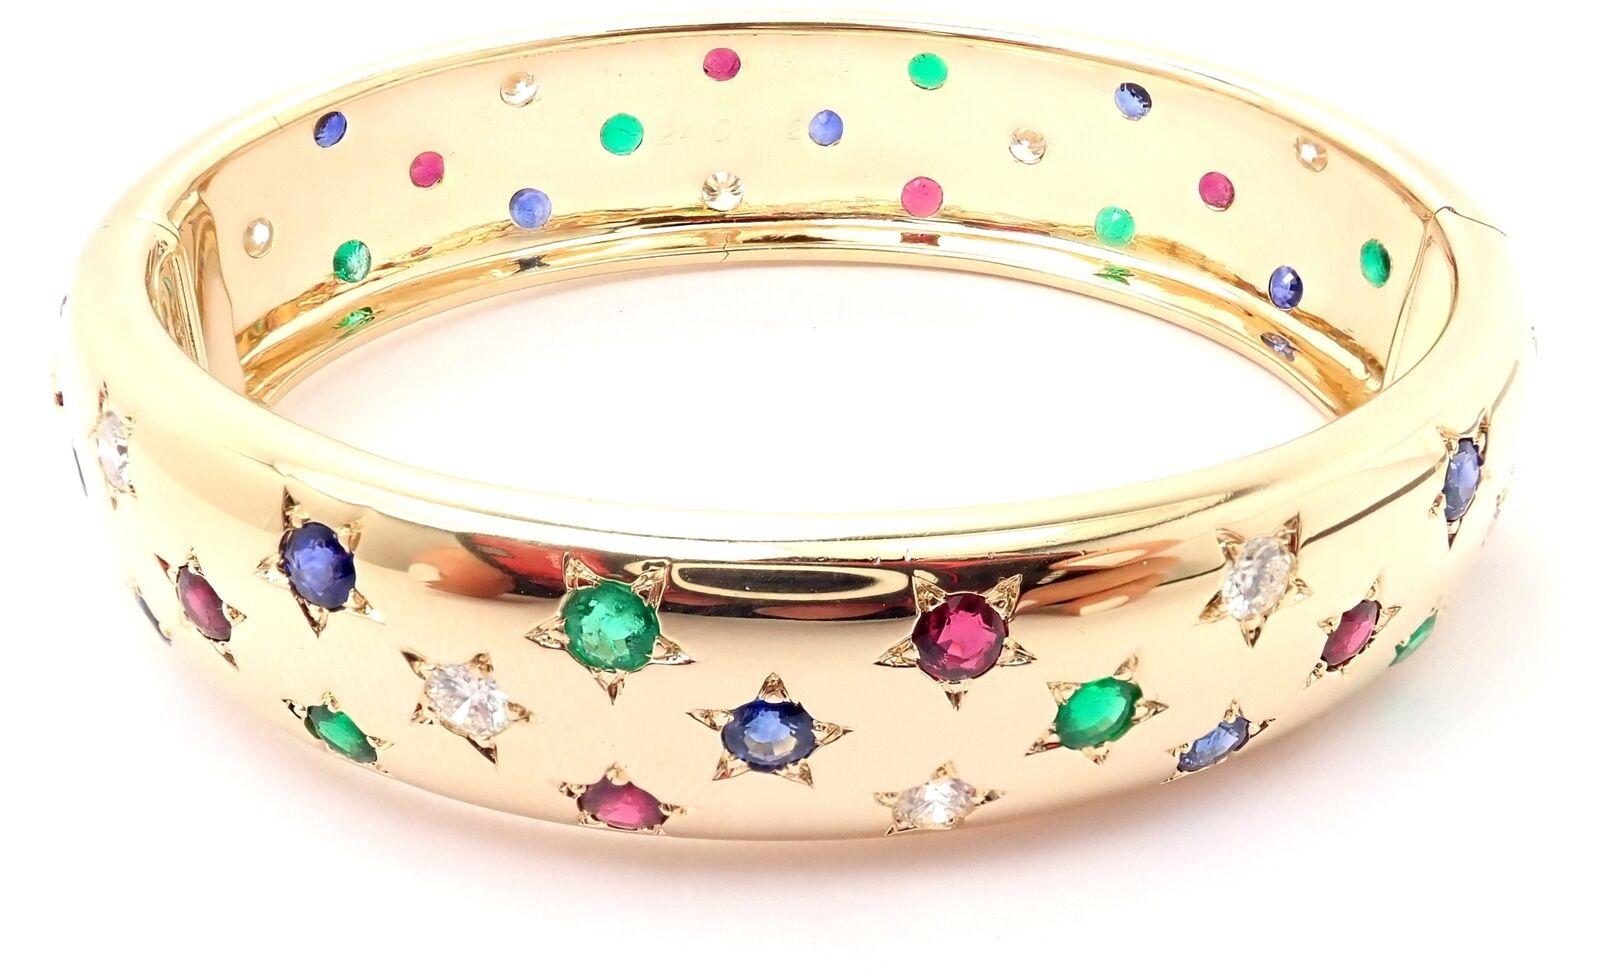 18k Yellow Gold Diamond Sapphire Emerald Ruby Bangle Bracelet by Cartier.
With round brilliant cut diamonds VVS1 clarity, F-H color Round rubies, emeralds and sapphires
This bracelet comes with Cartier box and certificate of